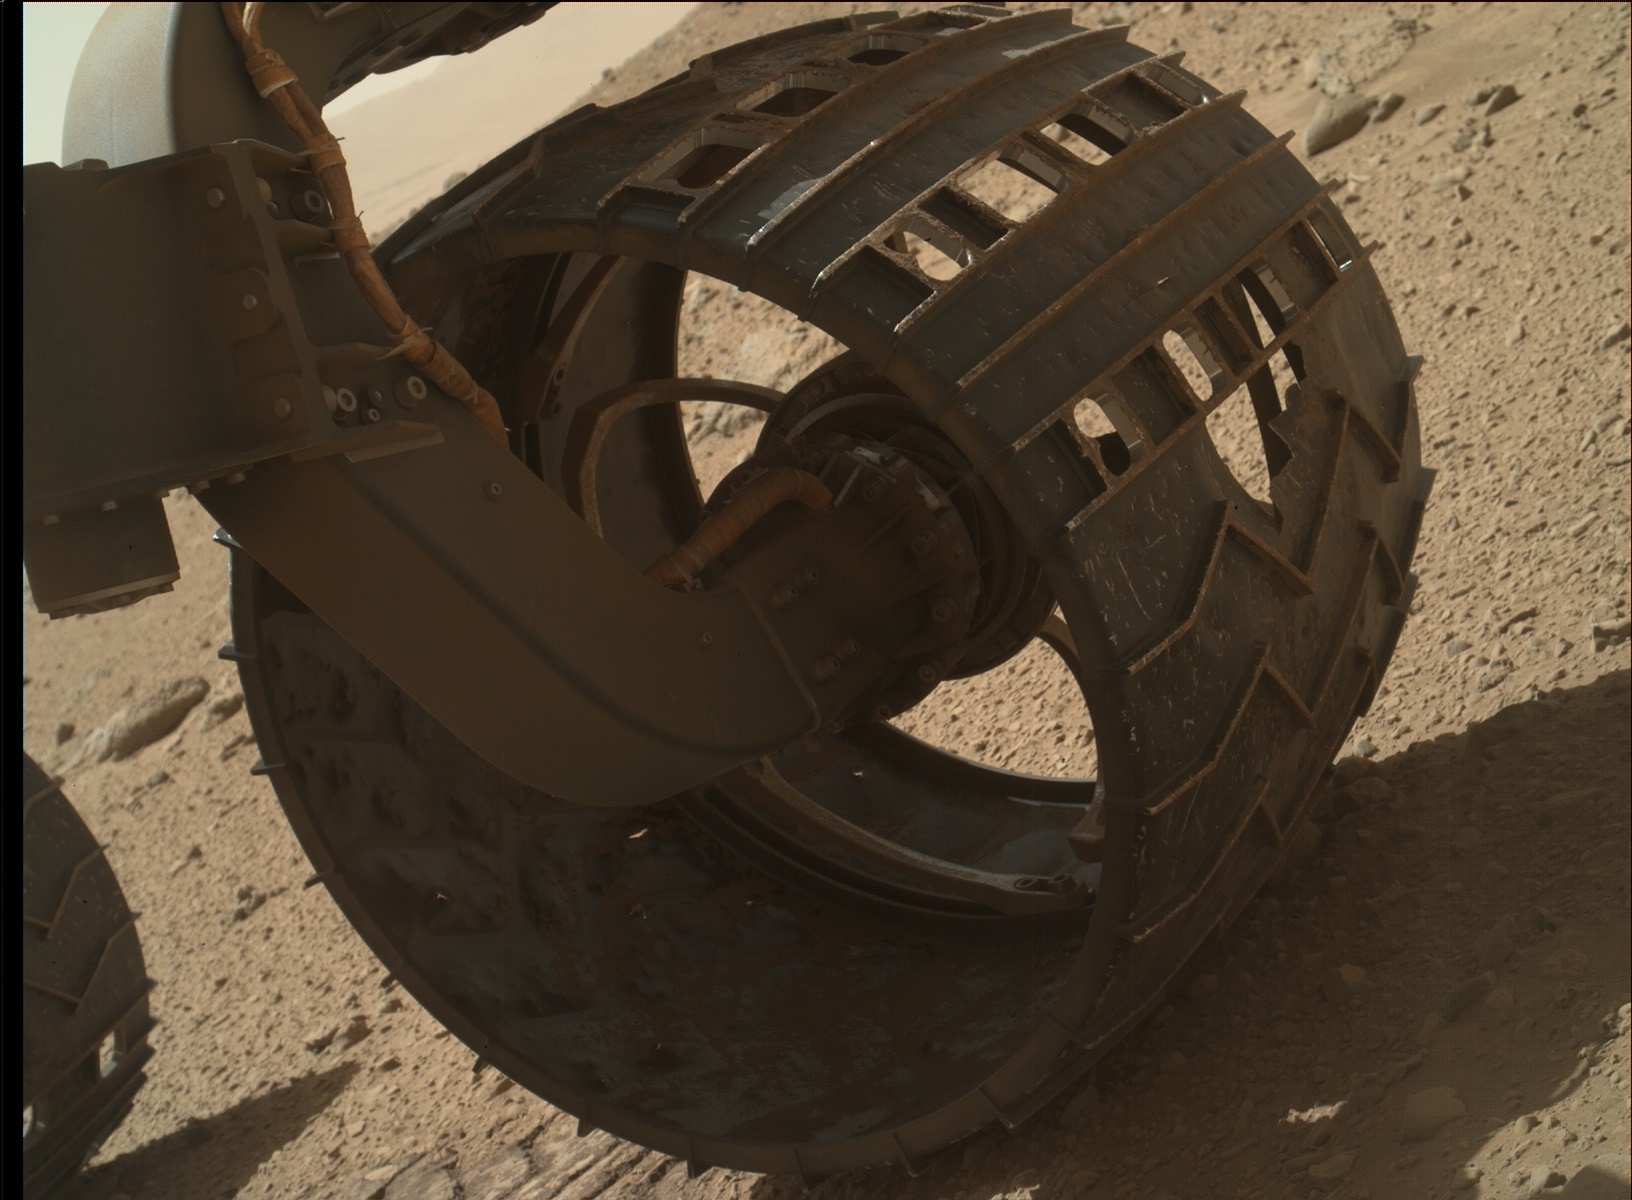 Nasa's Mars rover Curiosity acquired this image using its Mars Hand Lens Imager (MAHLI) on Sol 524